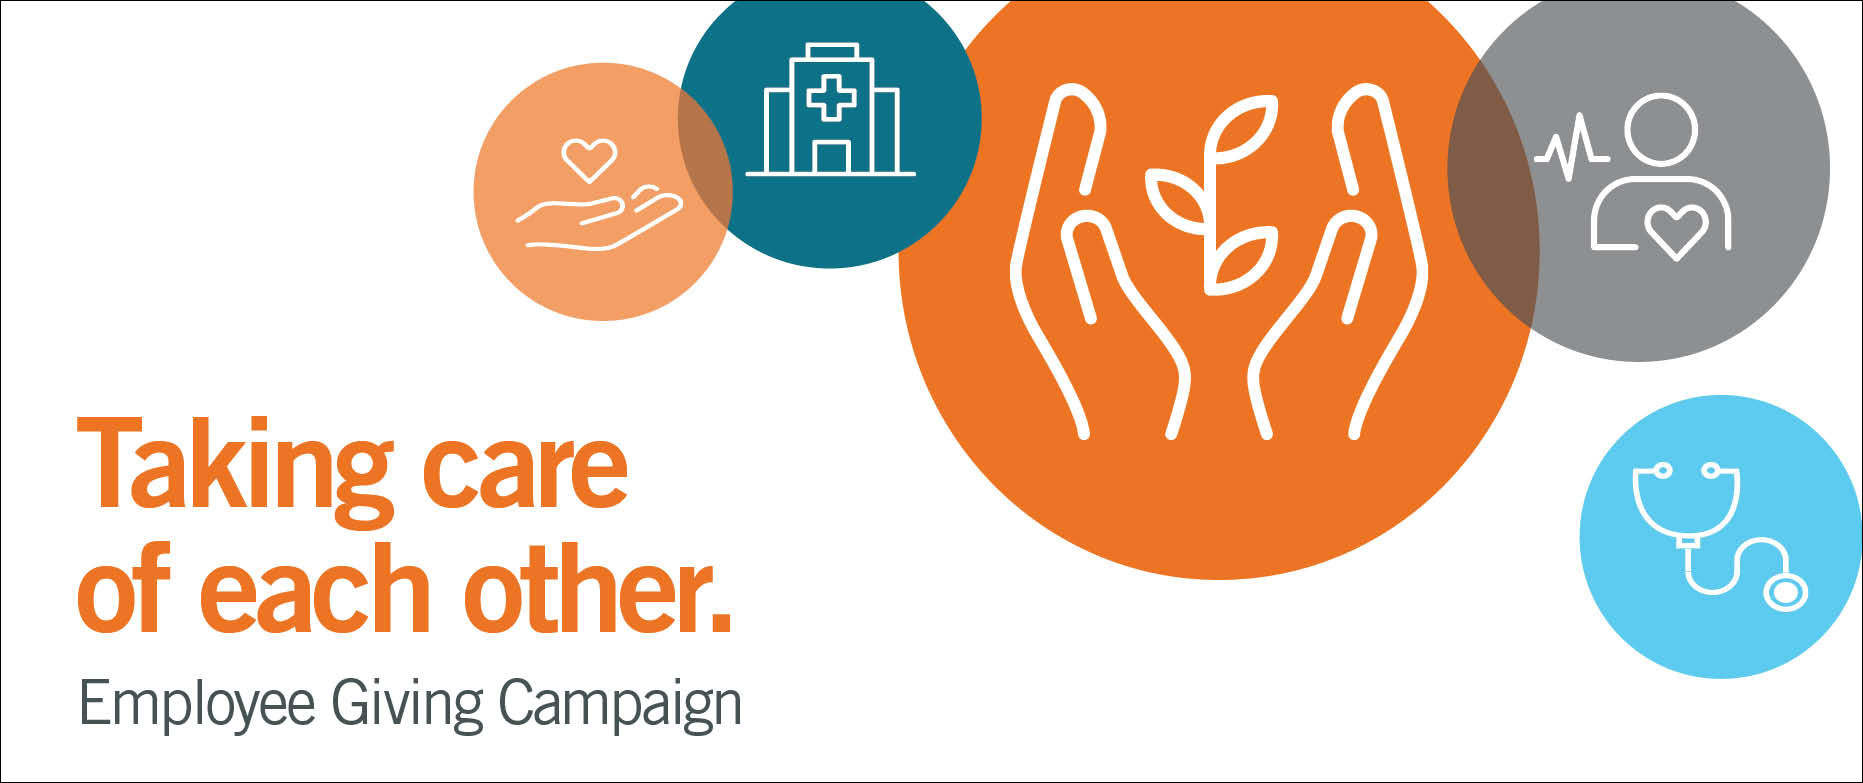 White heading image with symbols of giving. Copy reads "Taking care of each other. Employee Giving Campaign"